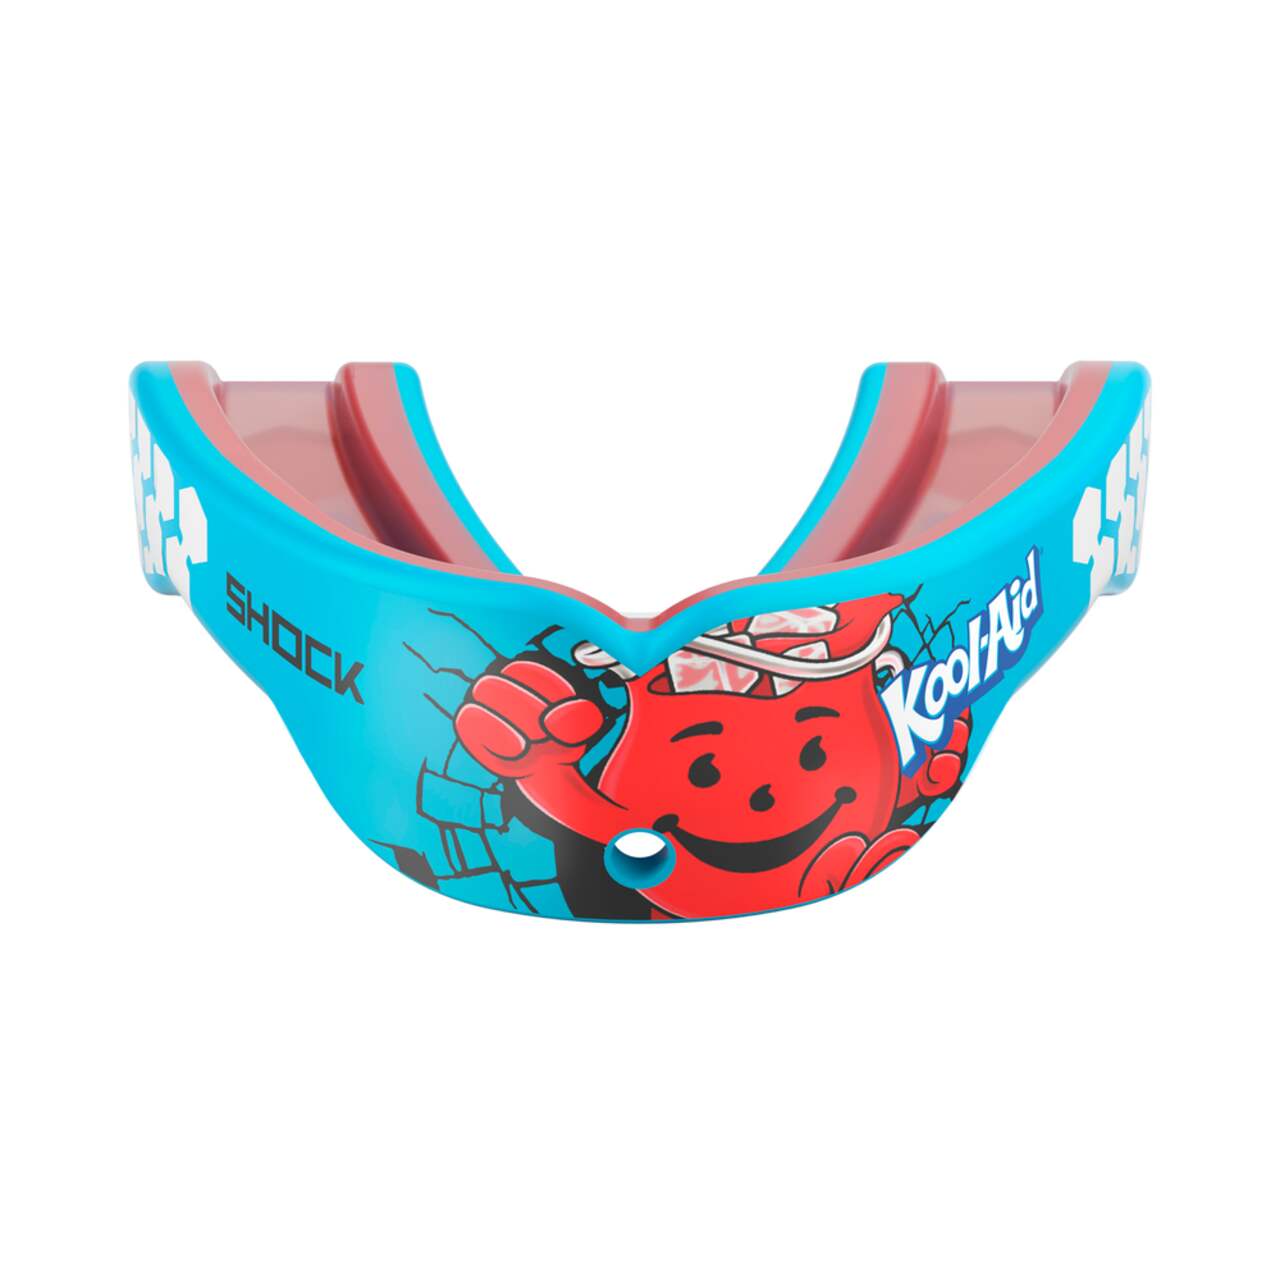 https://media-www.canadiantire.ca/product/playing/hockey/hockey-accessories/0838799/shock-doctor-gel-max-mouthguard-kool-aid-tropical-5cc788e1-f80b-4031-9218-5d042718405d.png?imdensity=1&imwidth=640&impolicy=mZoom